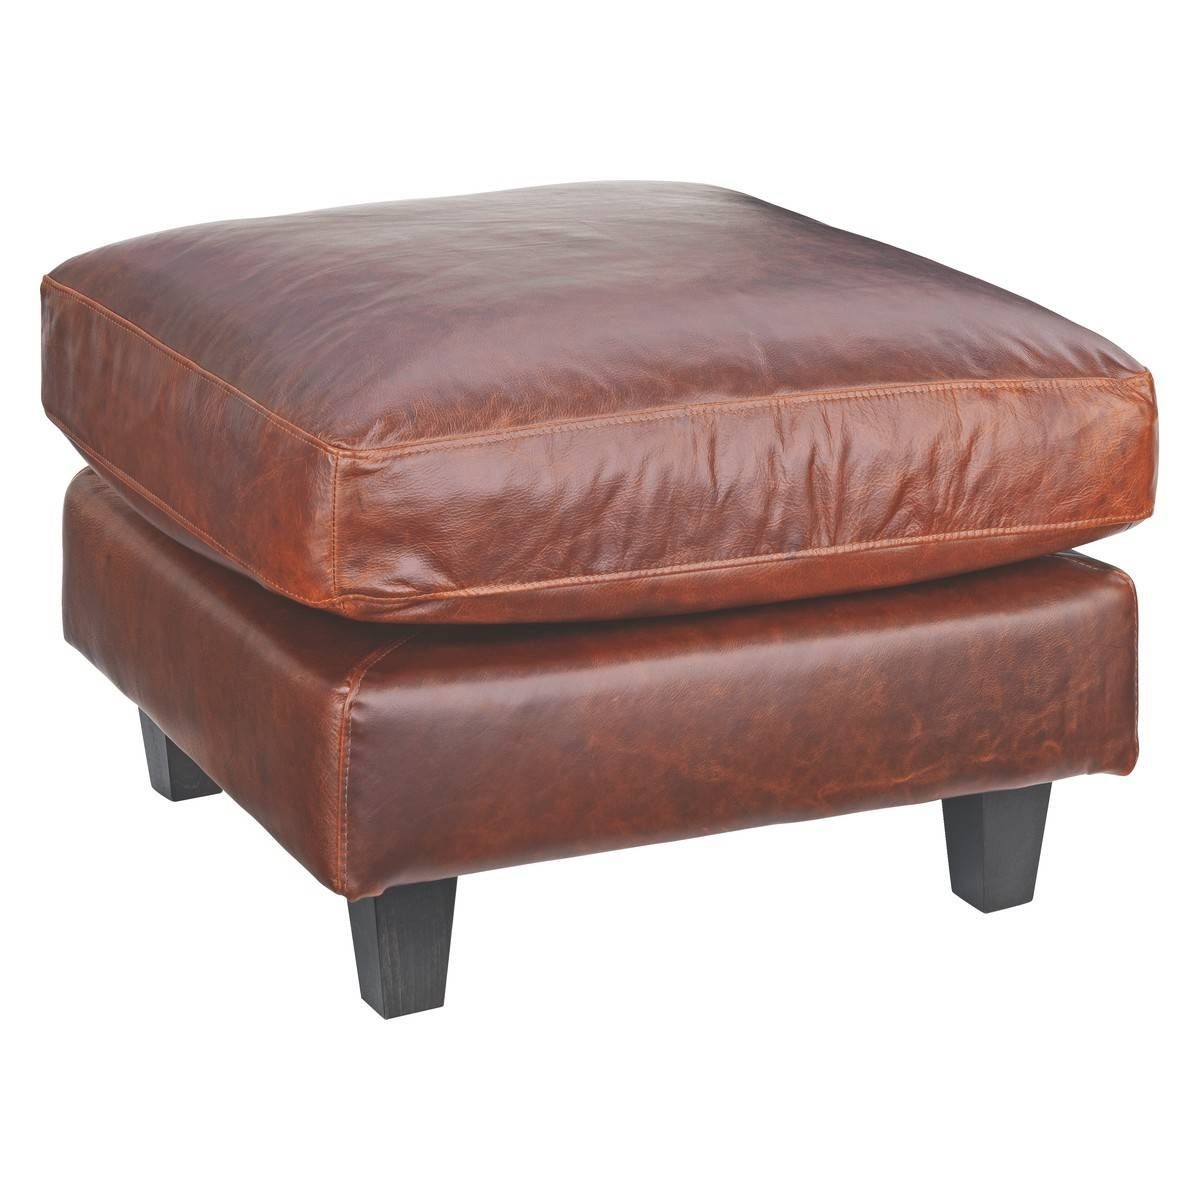 Chester Tan Leather Footstool, Dark Stained Feet | Buy Now At Throughout Leather Footstools (View 11 of 30)